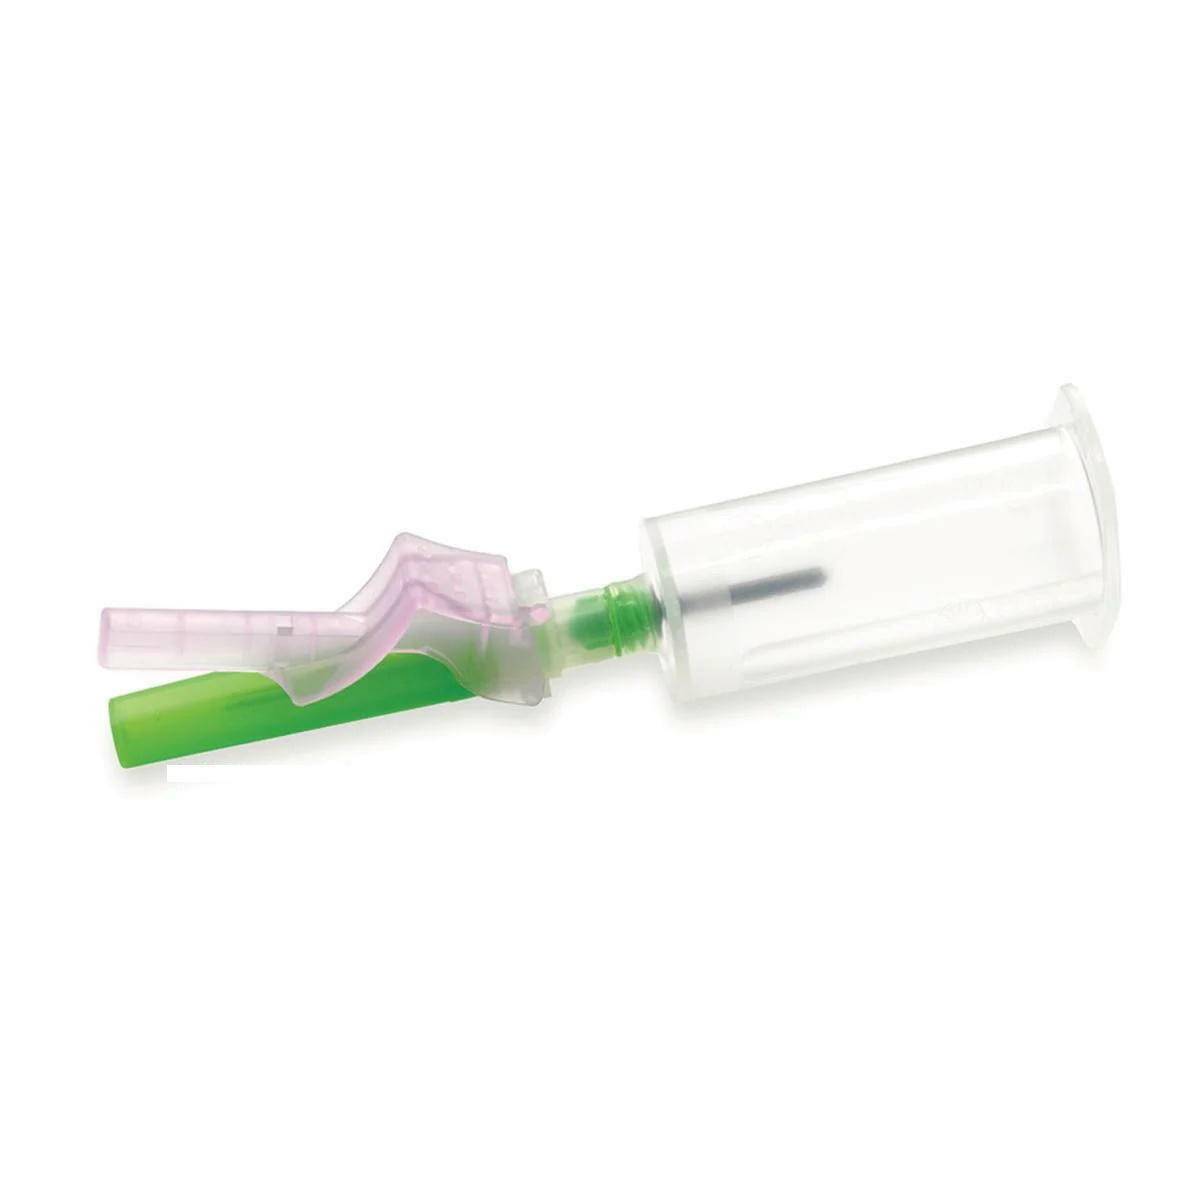 21g 1.25 inch BD Vacutainer Eclipse Blood Collection Needle with Preattached Holder - UKMEDI